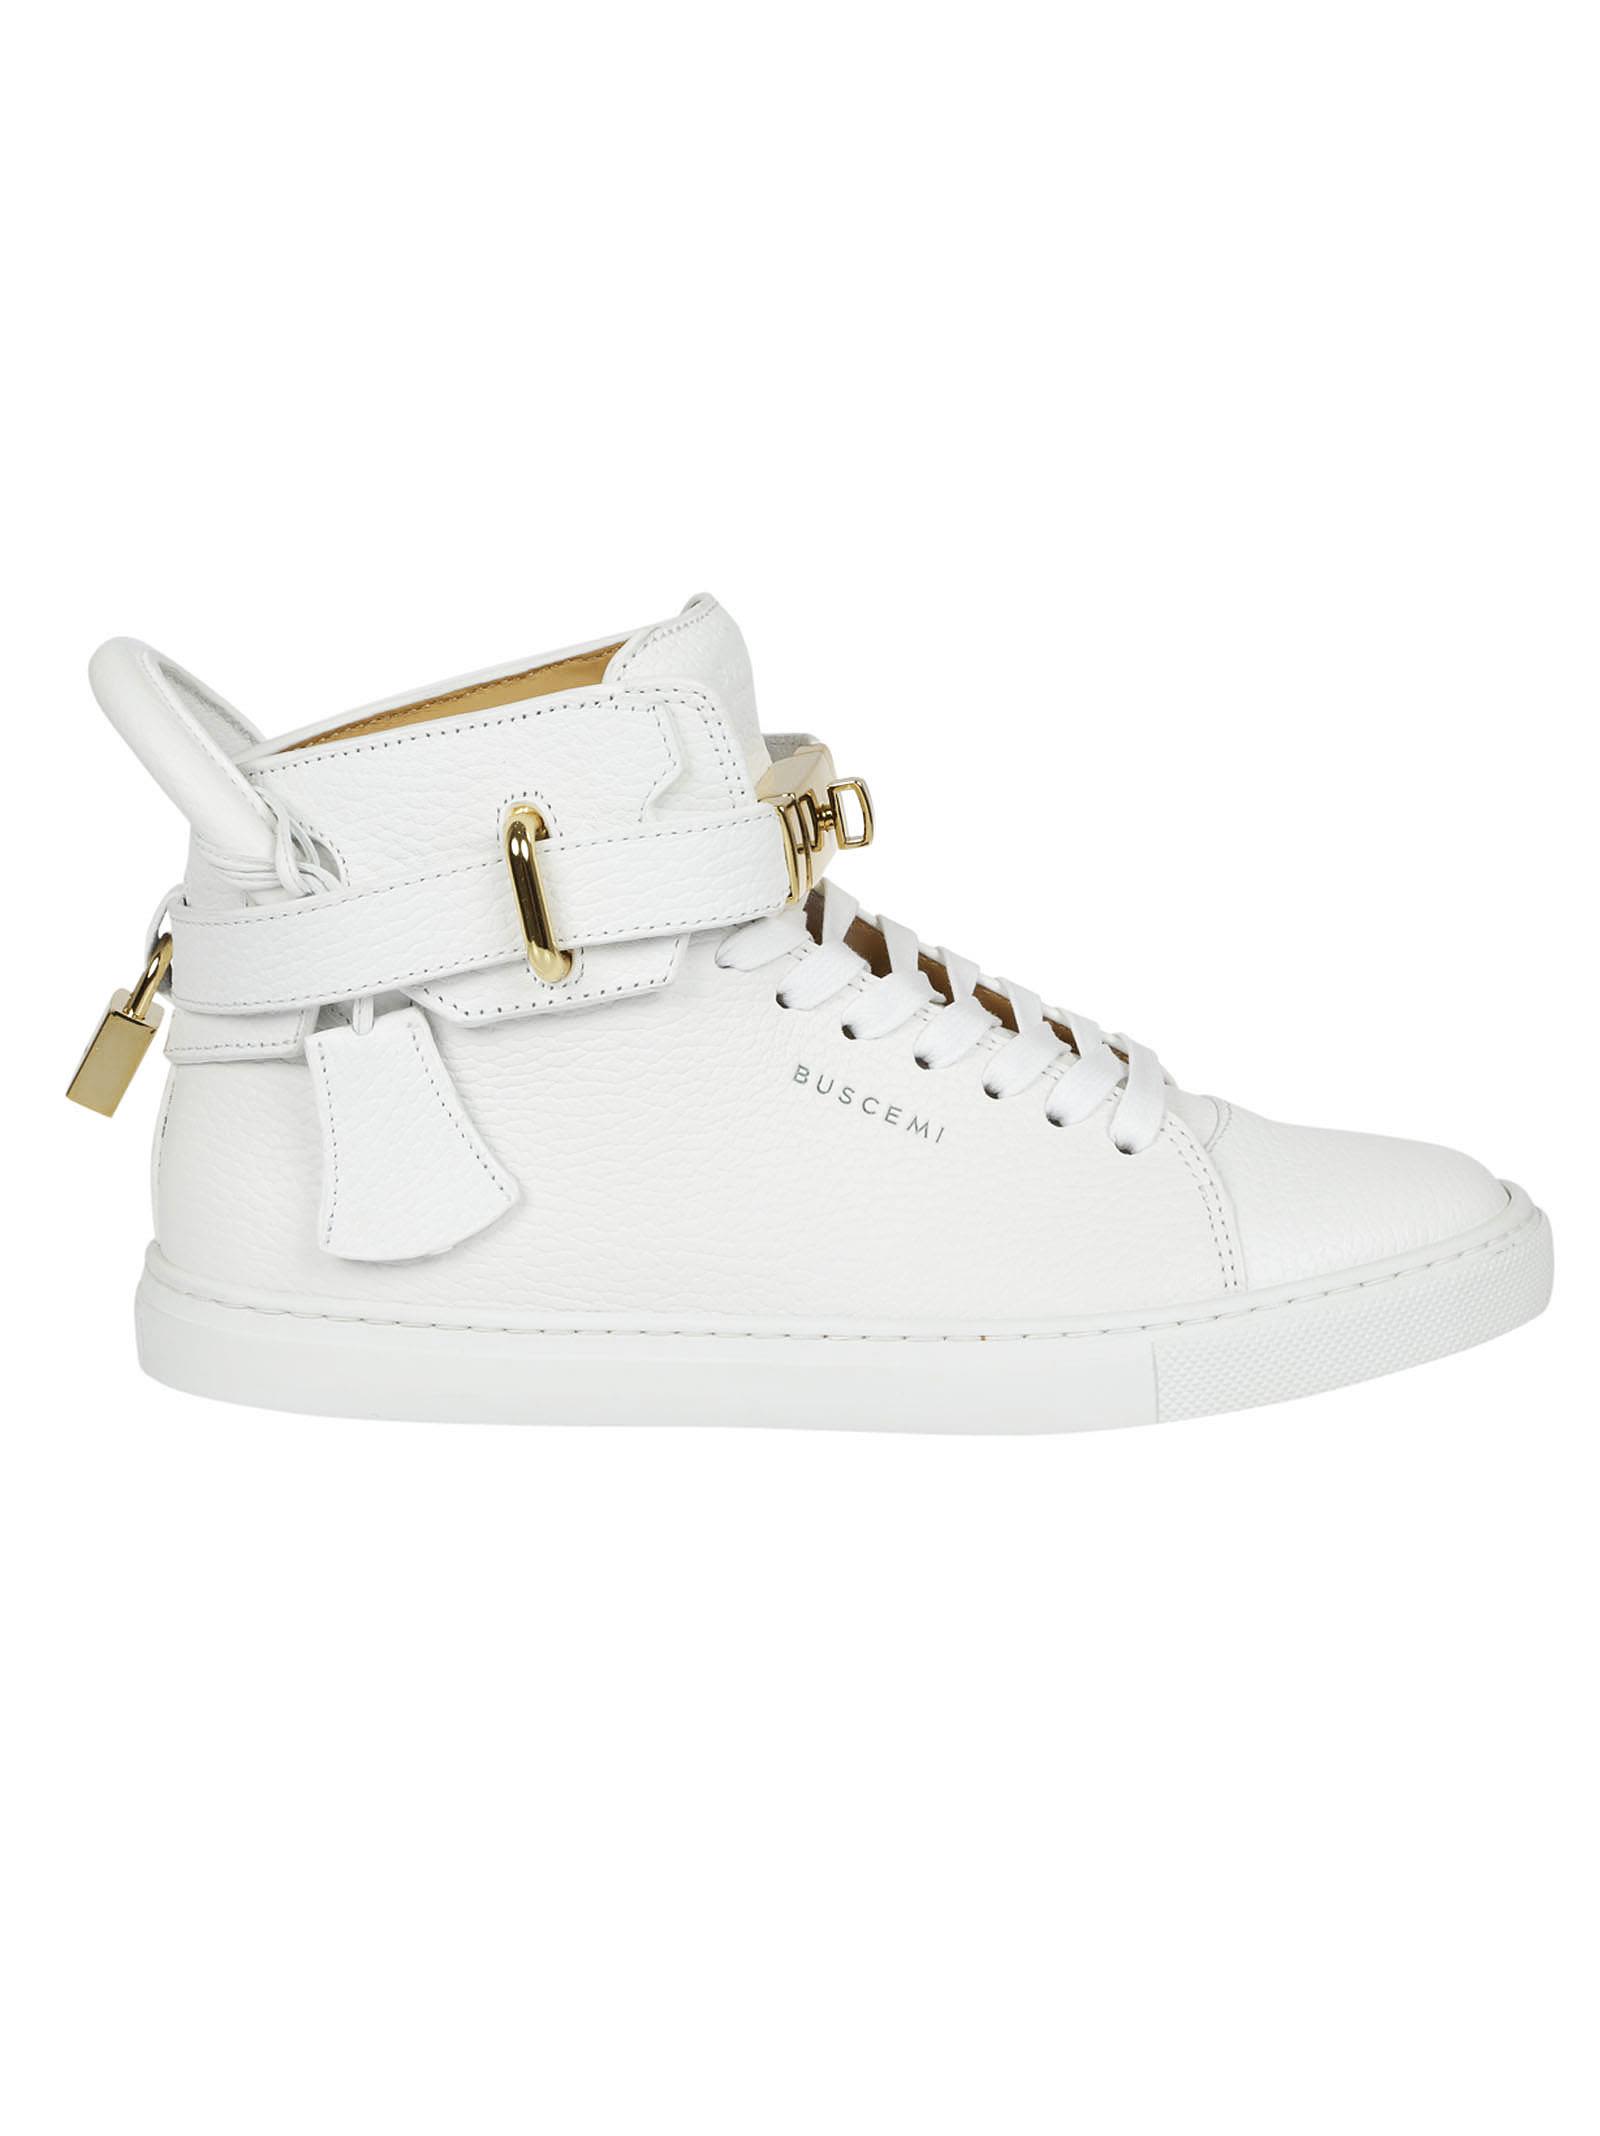 Buscemi Women'S 100Mm Belted Patent High-Top Sneaker, White | ModeSens